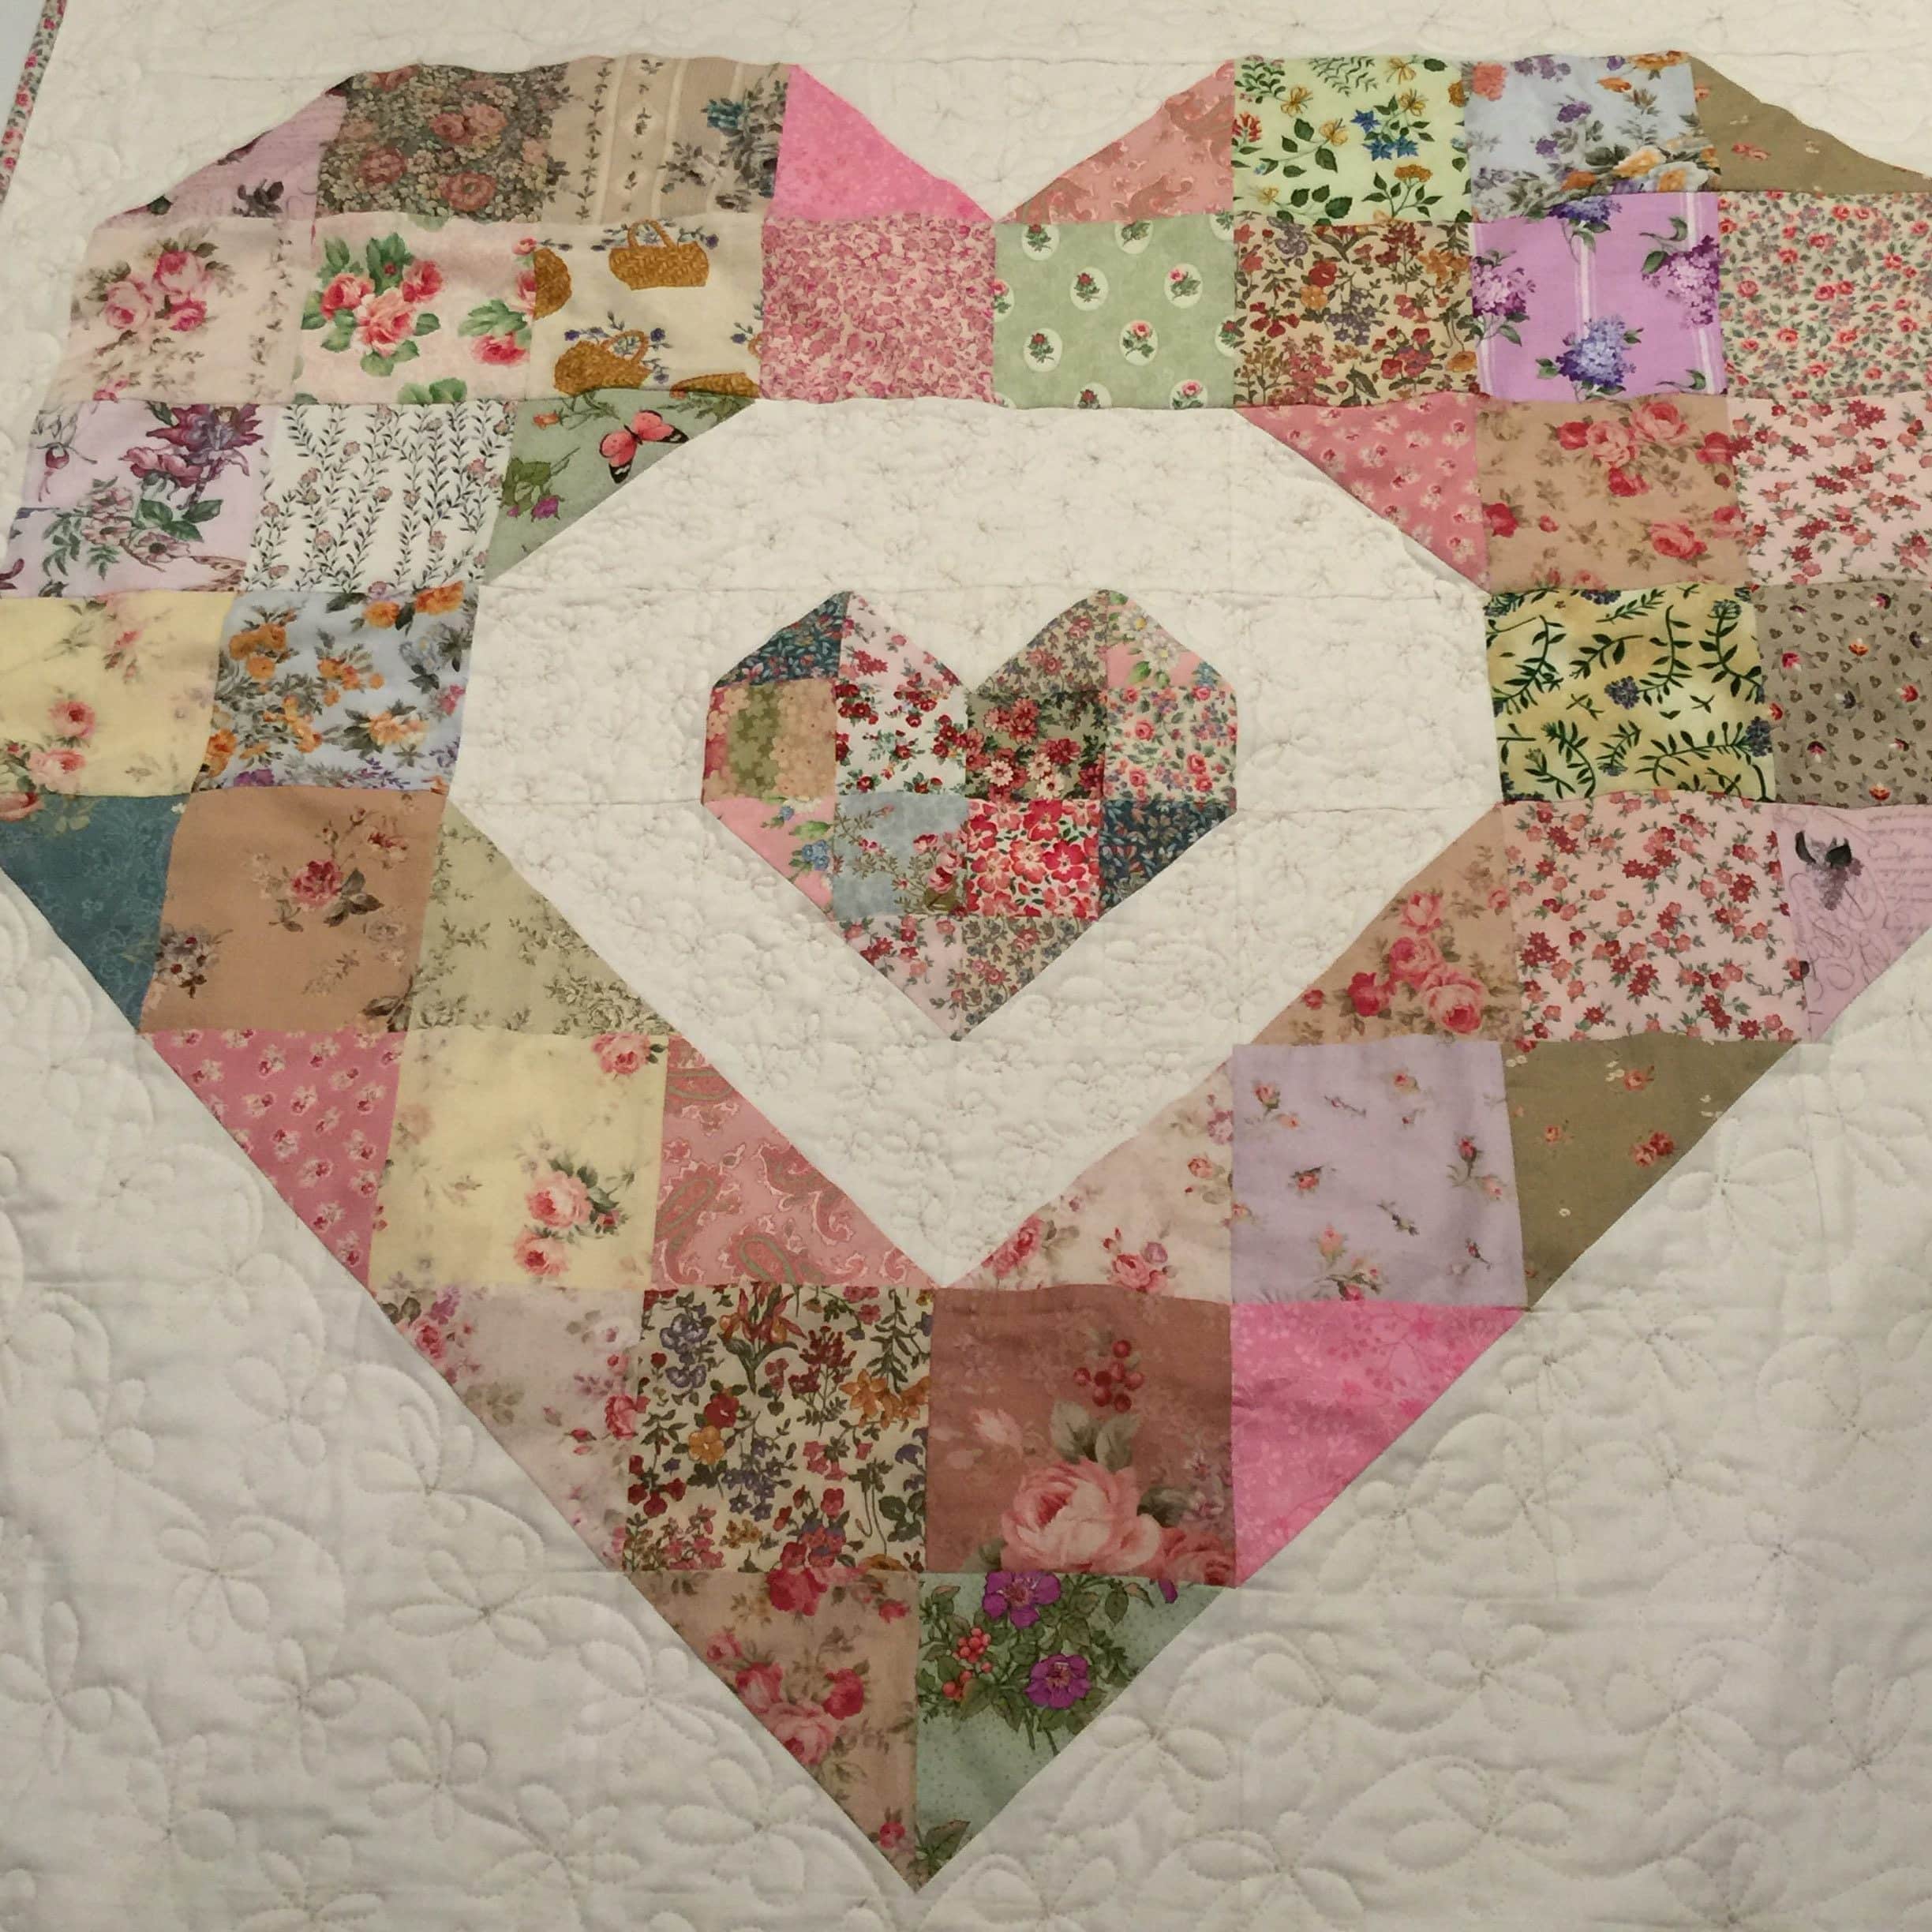 17 Fun & Easy Free Baby Quilt Patterns - Scrap Fabric Love